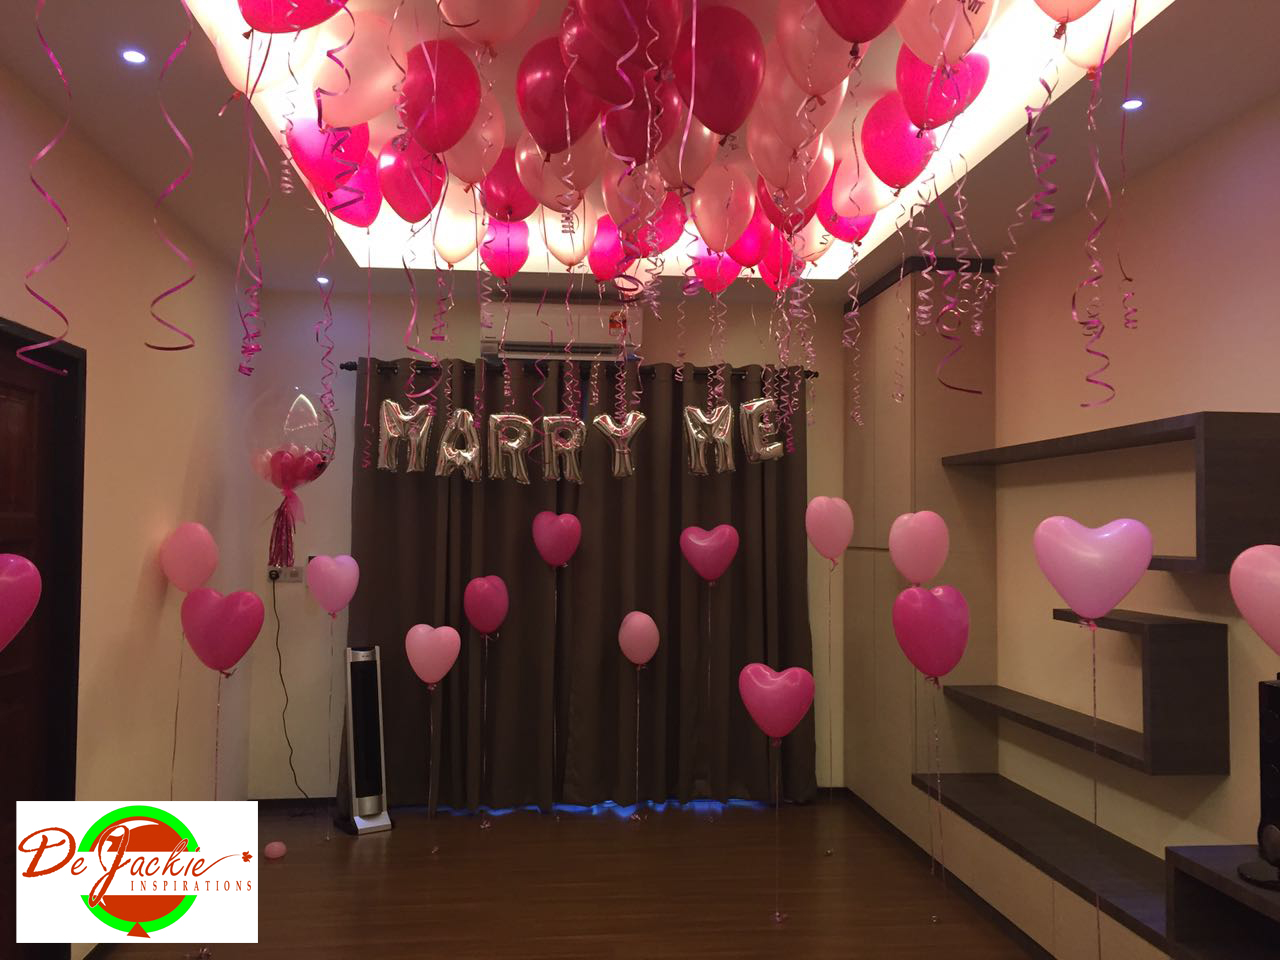  Balloon  decorations  for weddings  birthday parties 